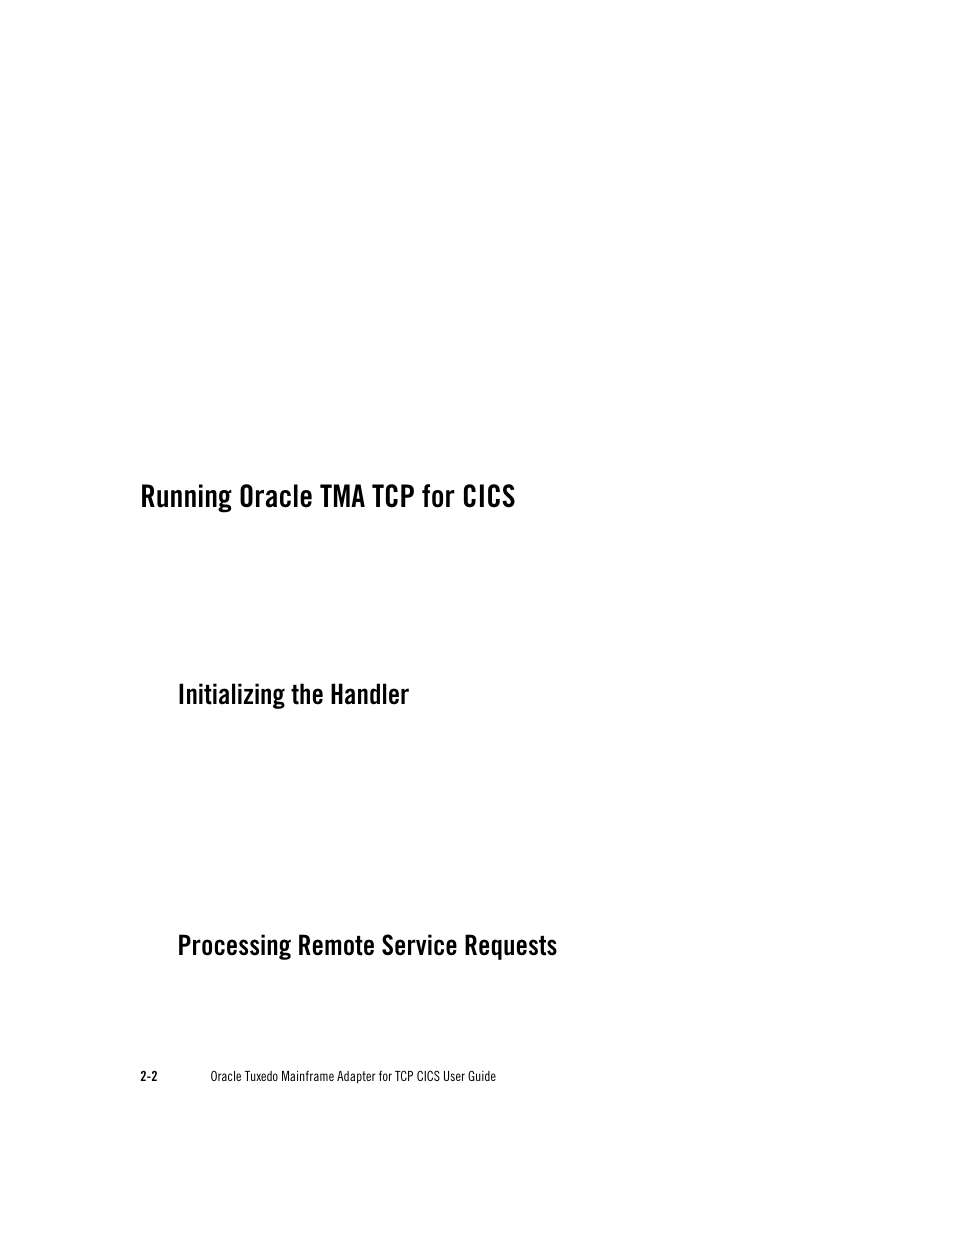 Running oracle tma tcp for cics, Initializing the handler, Processing remote service requests | Oracle Audio Technologies Oracle Tuxedo User Manual | Page 20 / 112